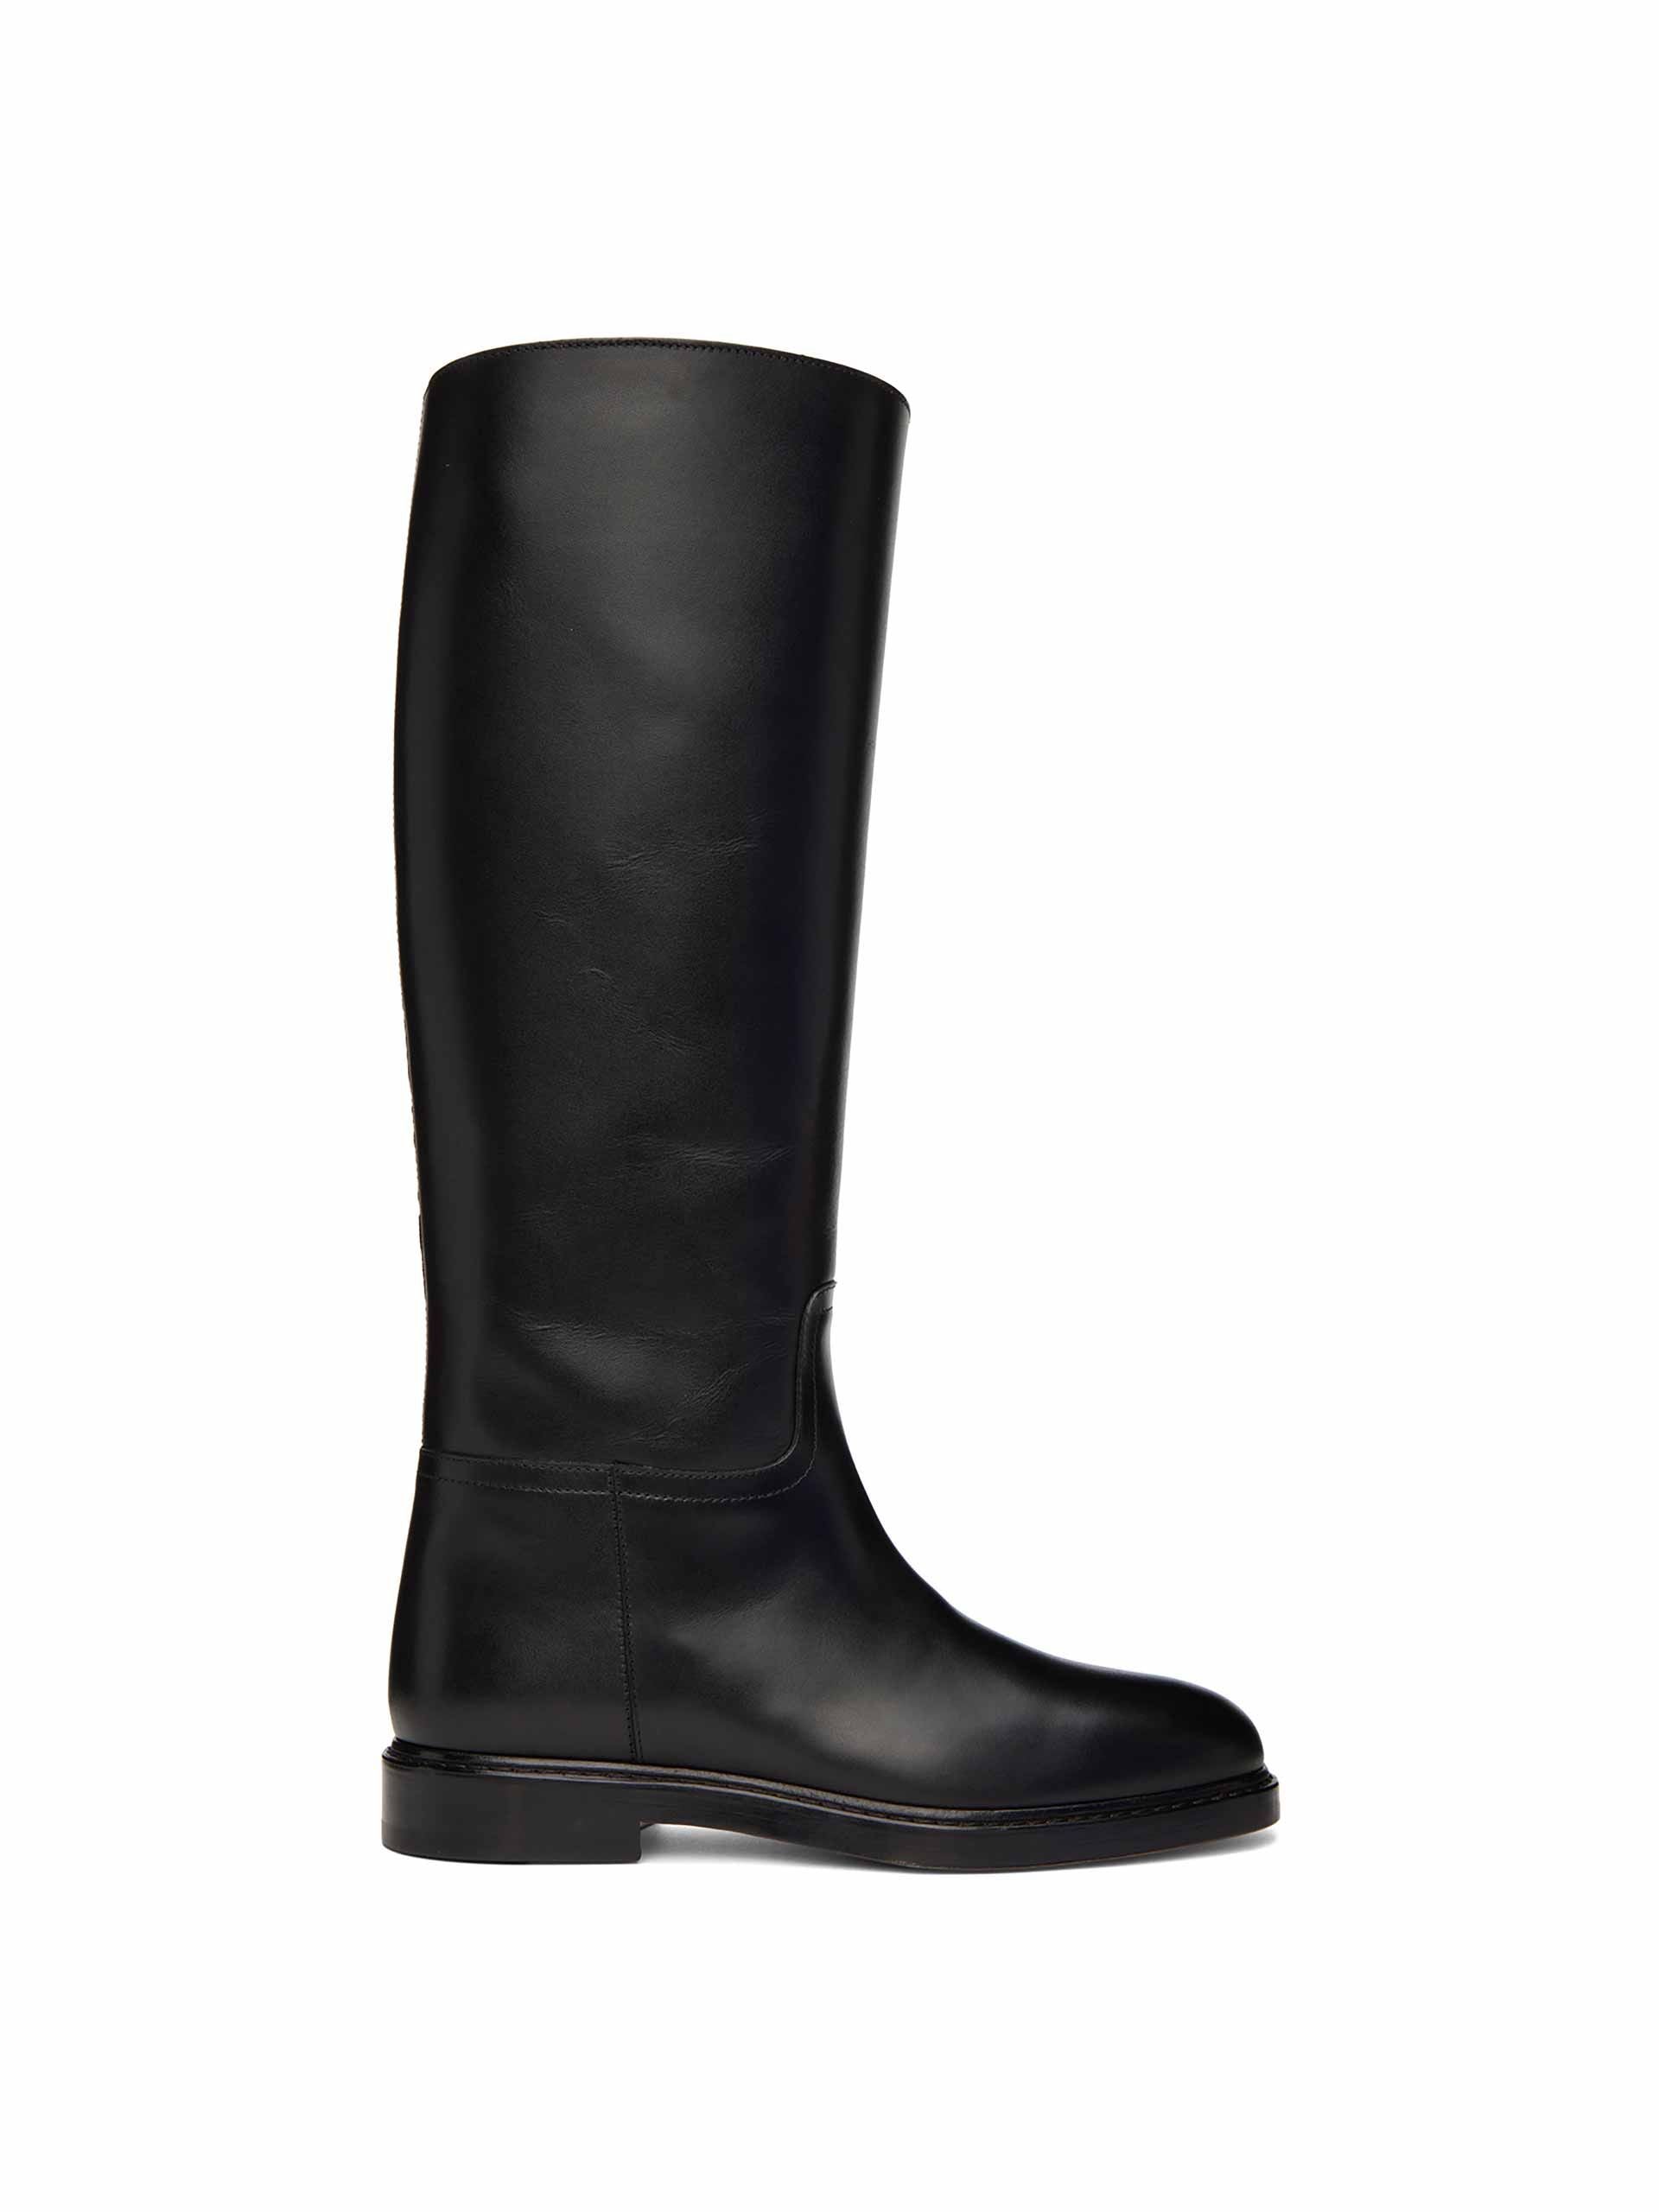 Black leather riding boots - Collagerie